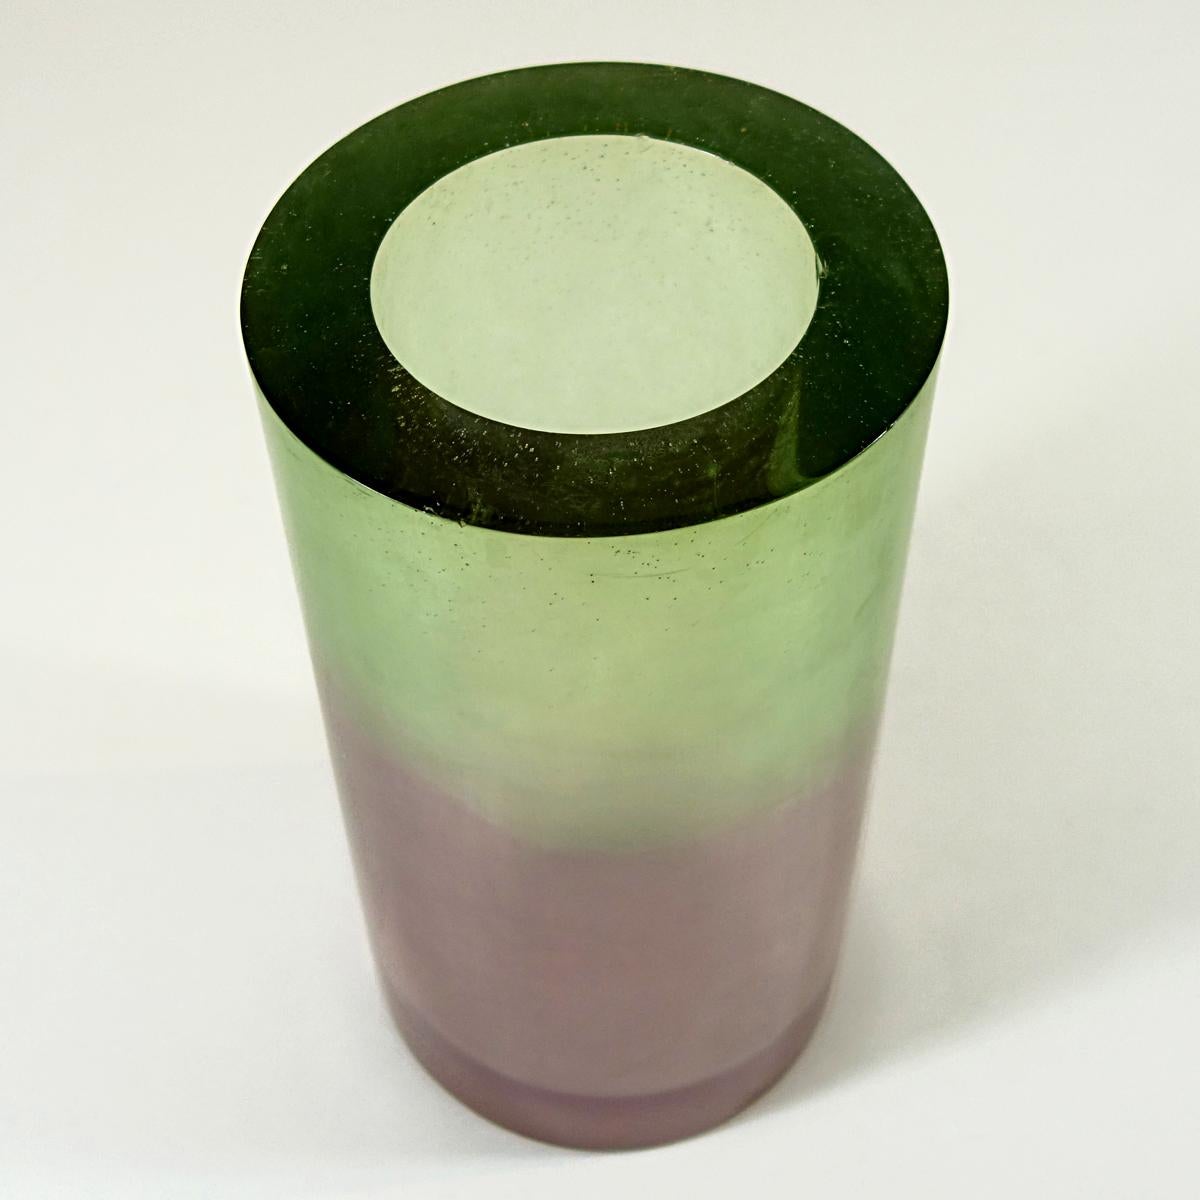 This vase is made of resin and fiberglass by American artist Steve Zoller. He is unique in his use of color, elemental shapes and flamboyant style. In 1993 he made this beautiful vase together with a floor lamp, a table lamp, a sconce and another